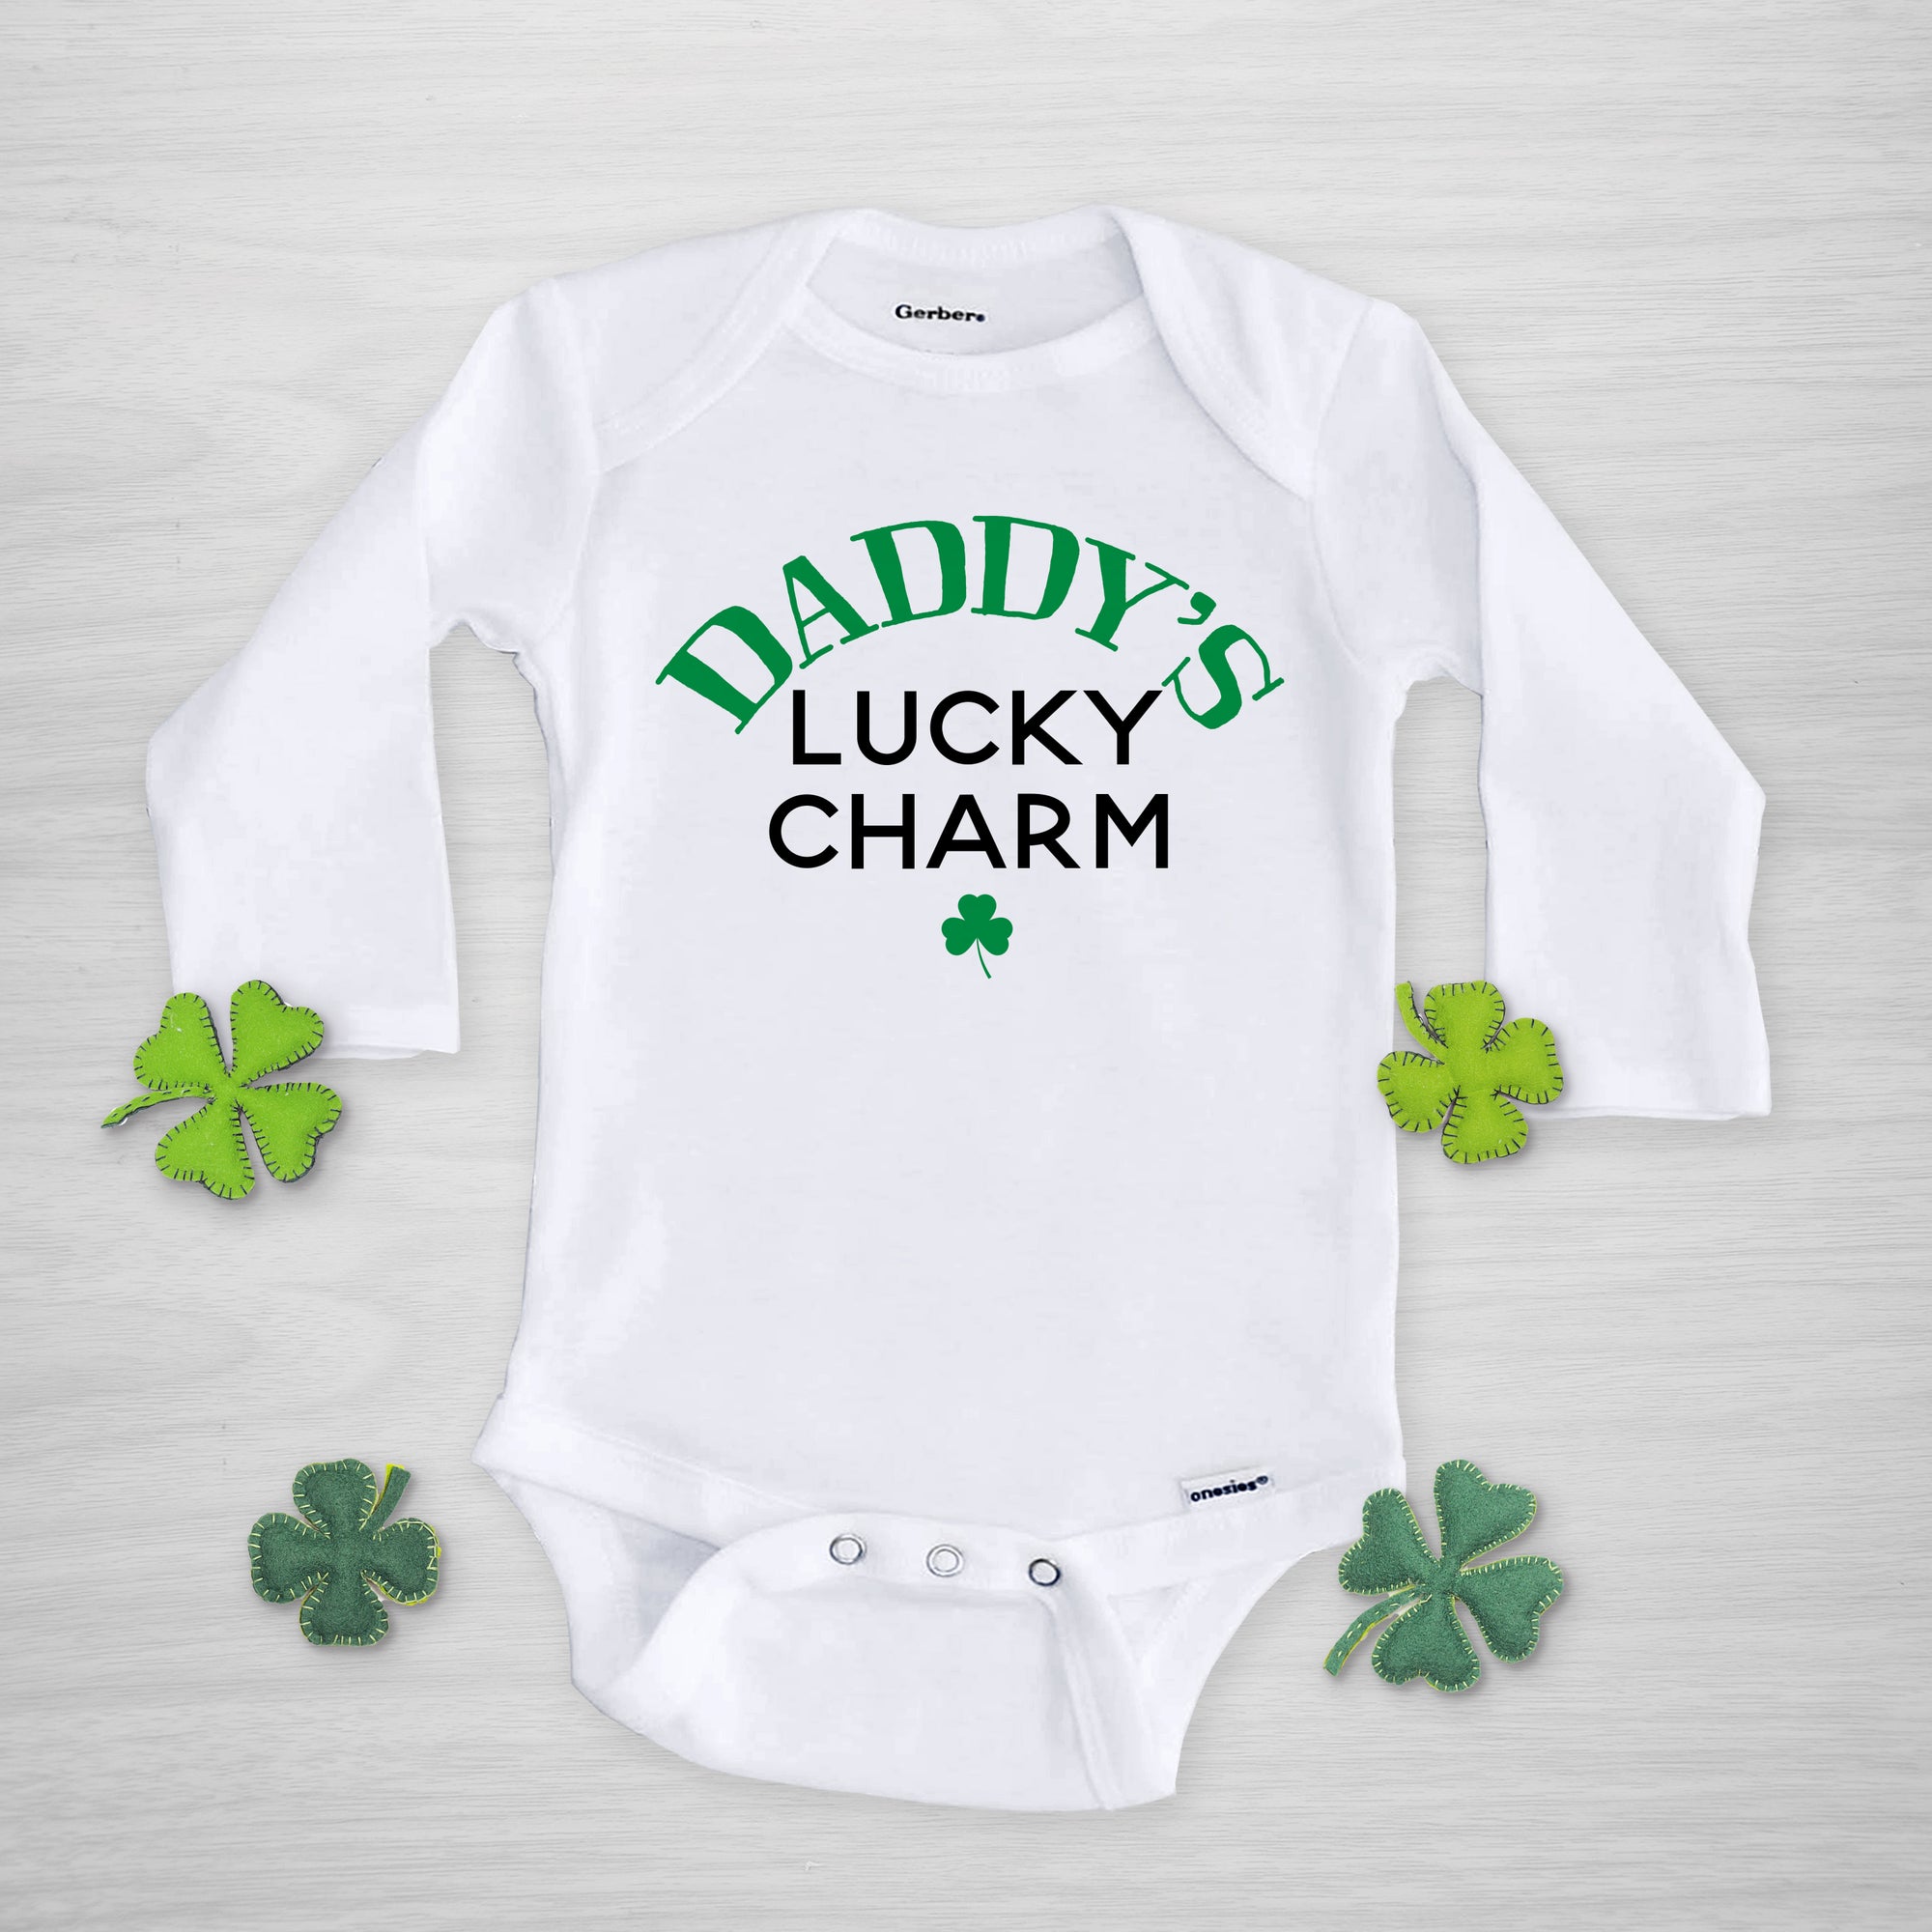 daddy's lucky charm onesie, long sleeved